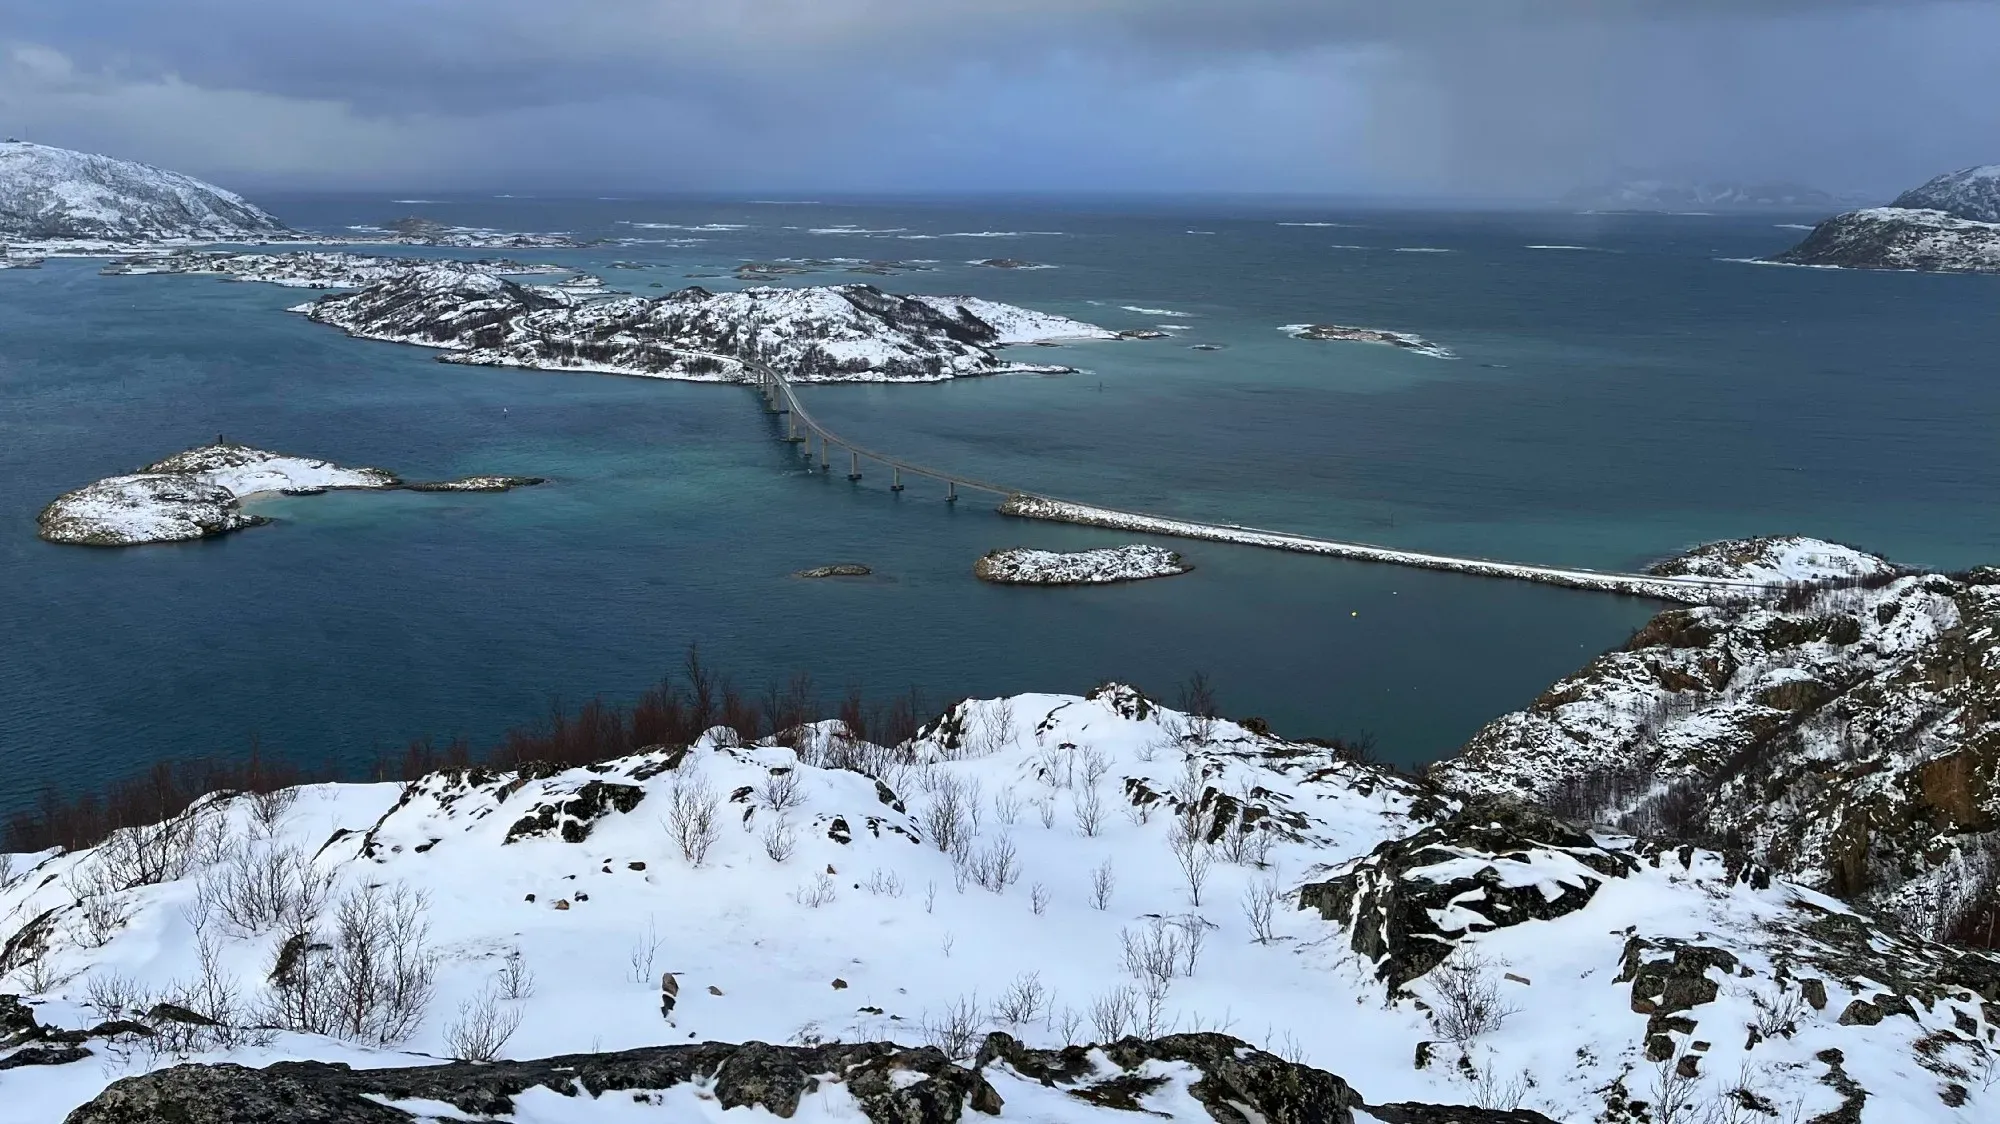 View of snowy hills overlooking the bridge connecting to Sommarøy island